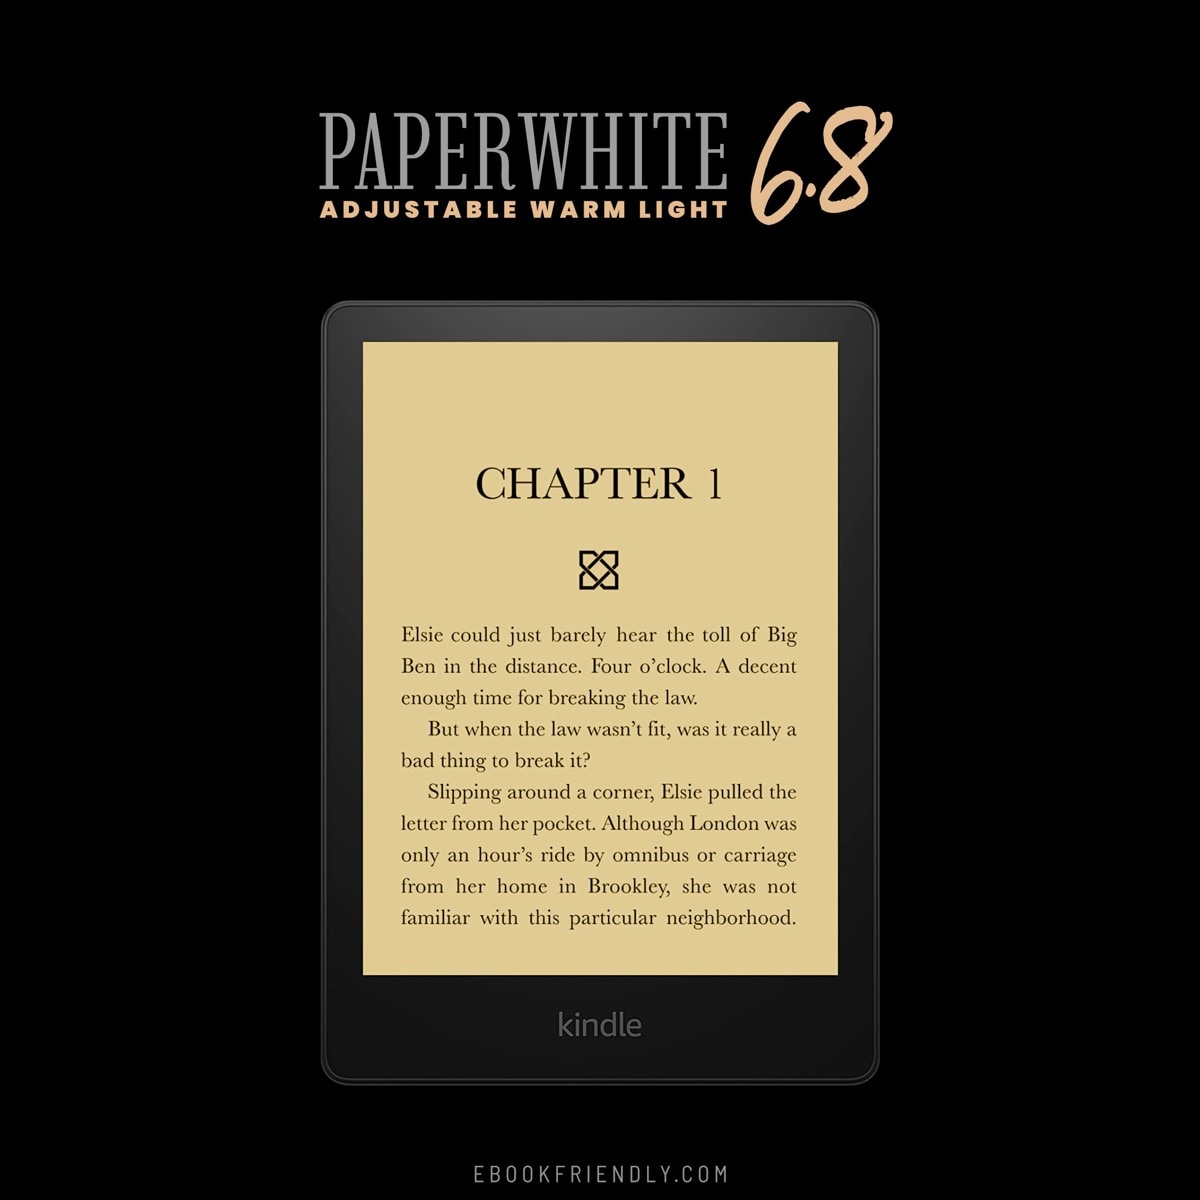 Kindle Paperwhite 2021 with adjustable warm light